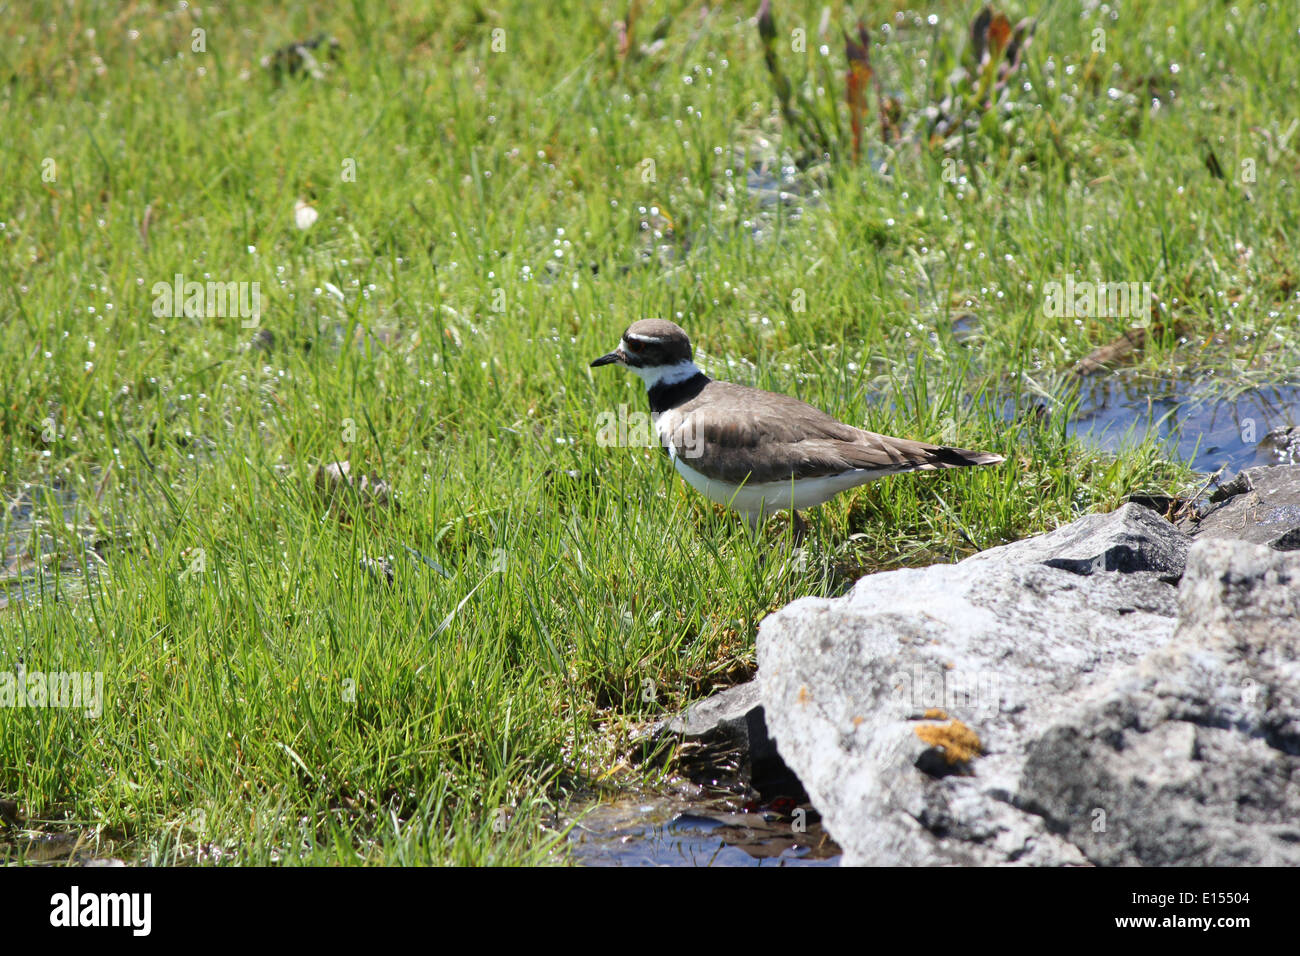 Killdeer (Charadrius vociferous) in the grass by the rocks of  a man-made water hole. Stock Photo